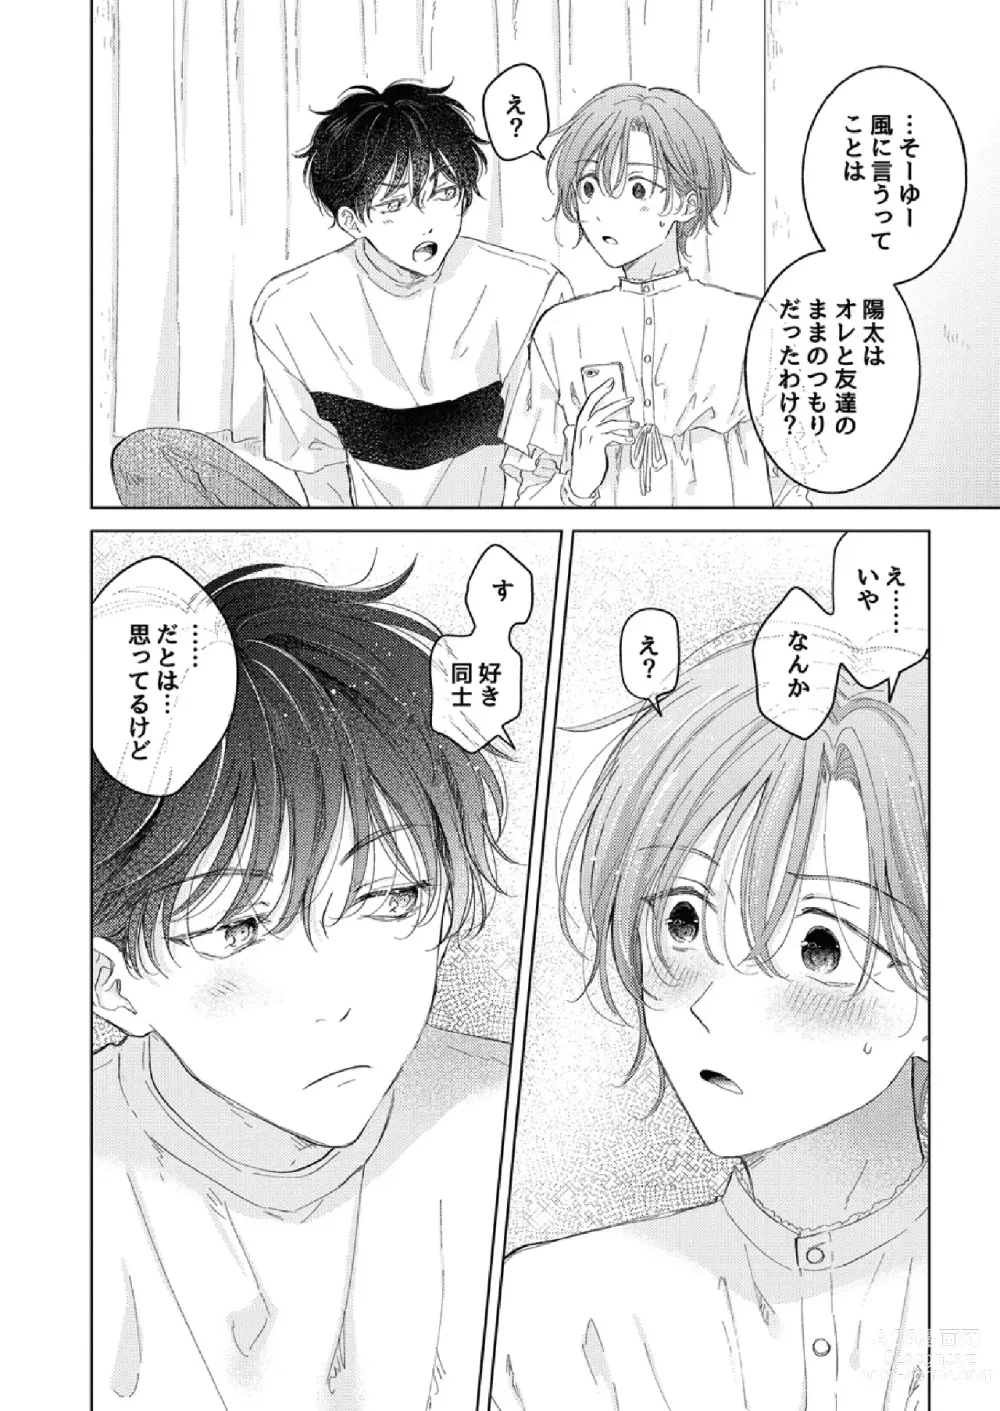 Page 14 of doujinshi How to use Gender-Changing Apps Properly 2